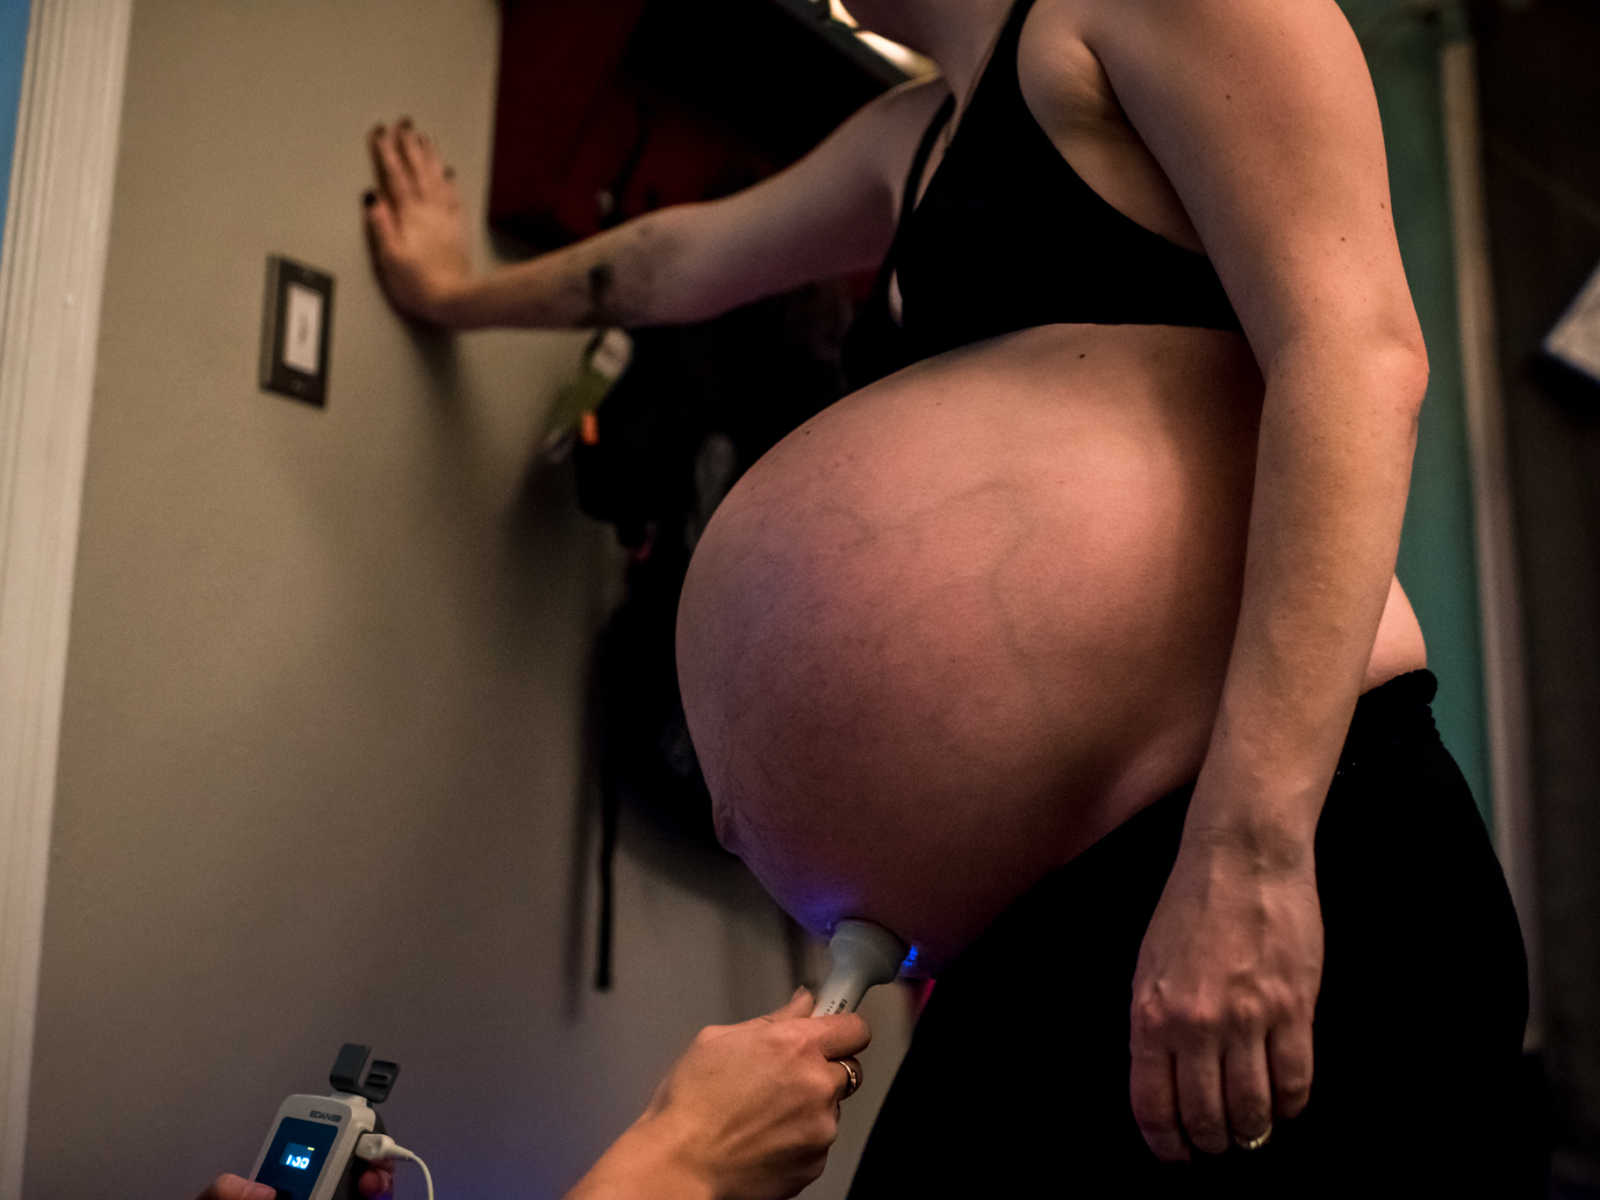 Pregnant woman standing in sports bra leaning against a wall before giving birth to 11 pound baby